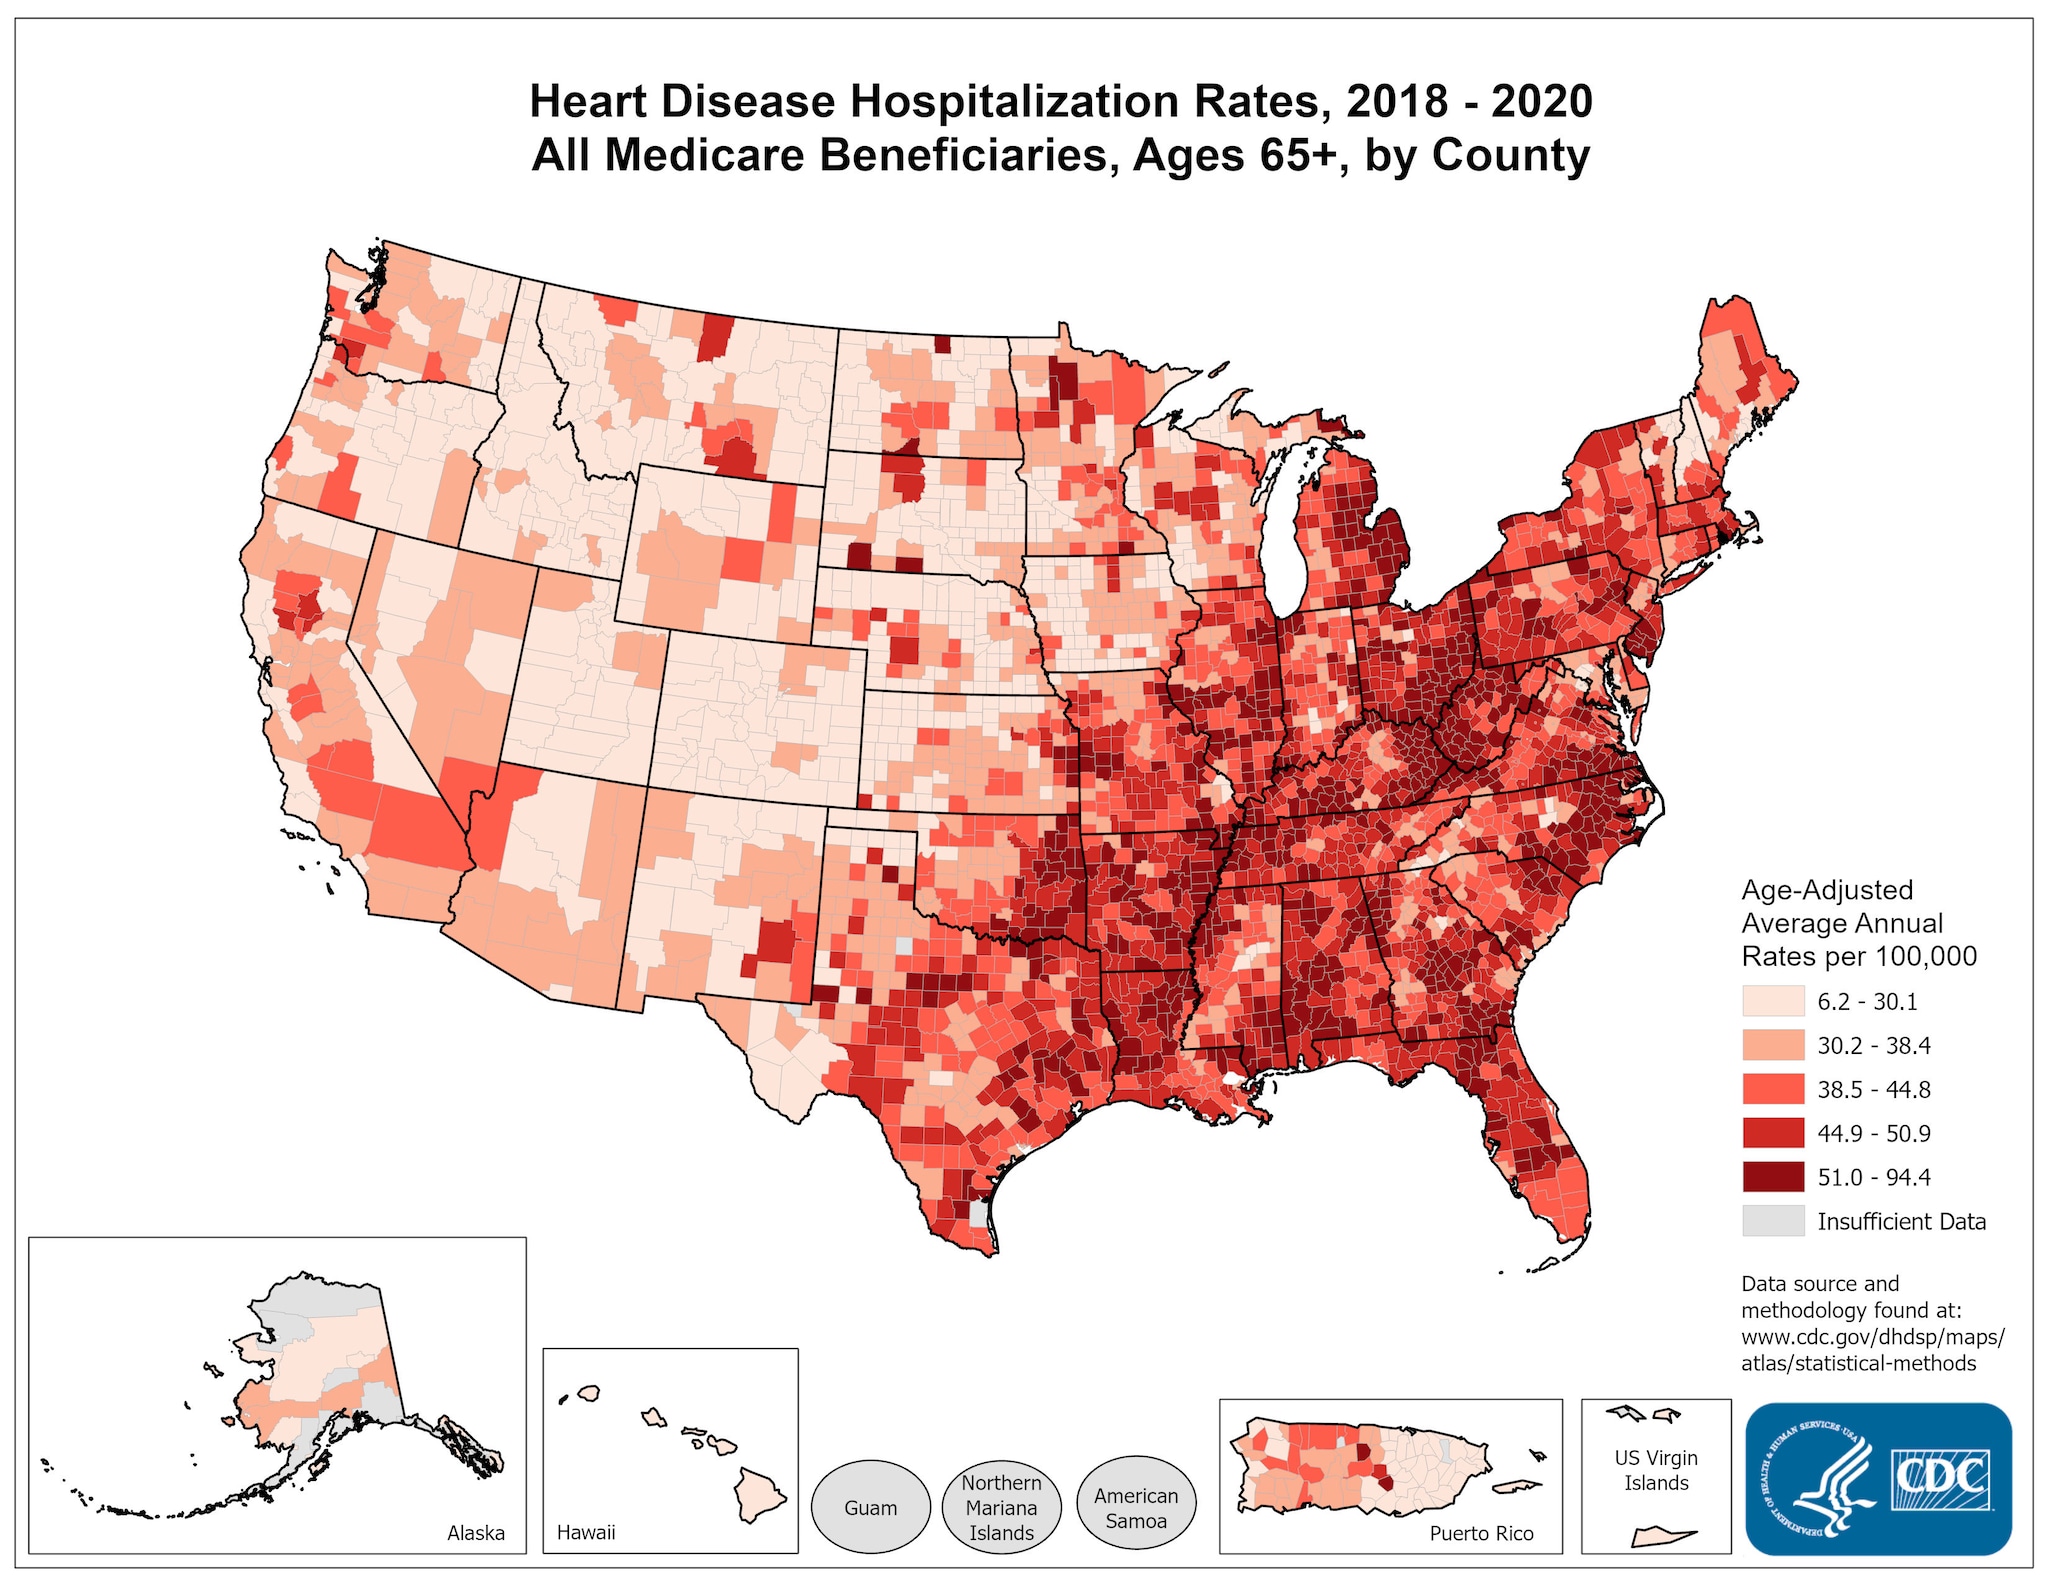 Heart Disease Hospitalization Rates for 2018 through 2020 for Adults Aged 65 Years and Older by County